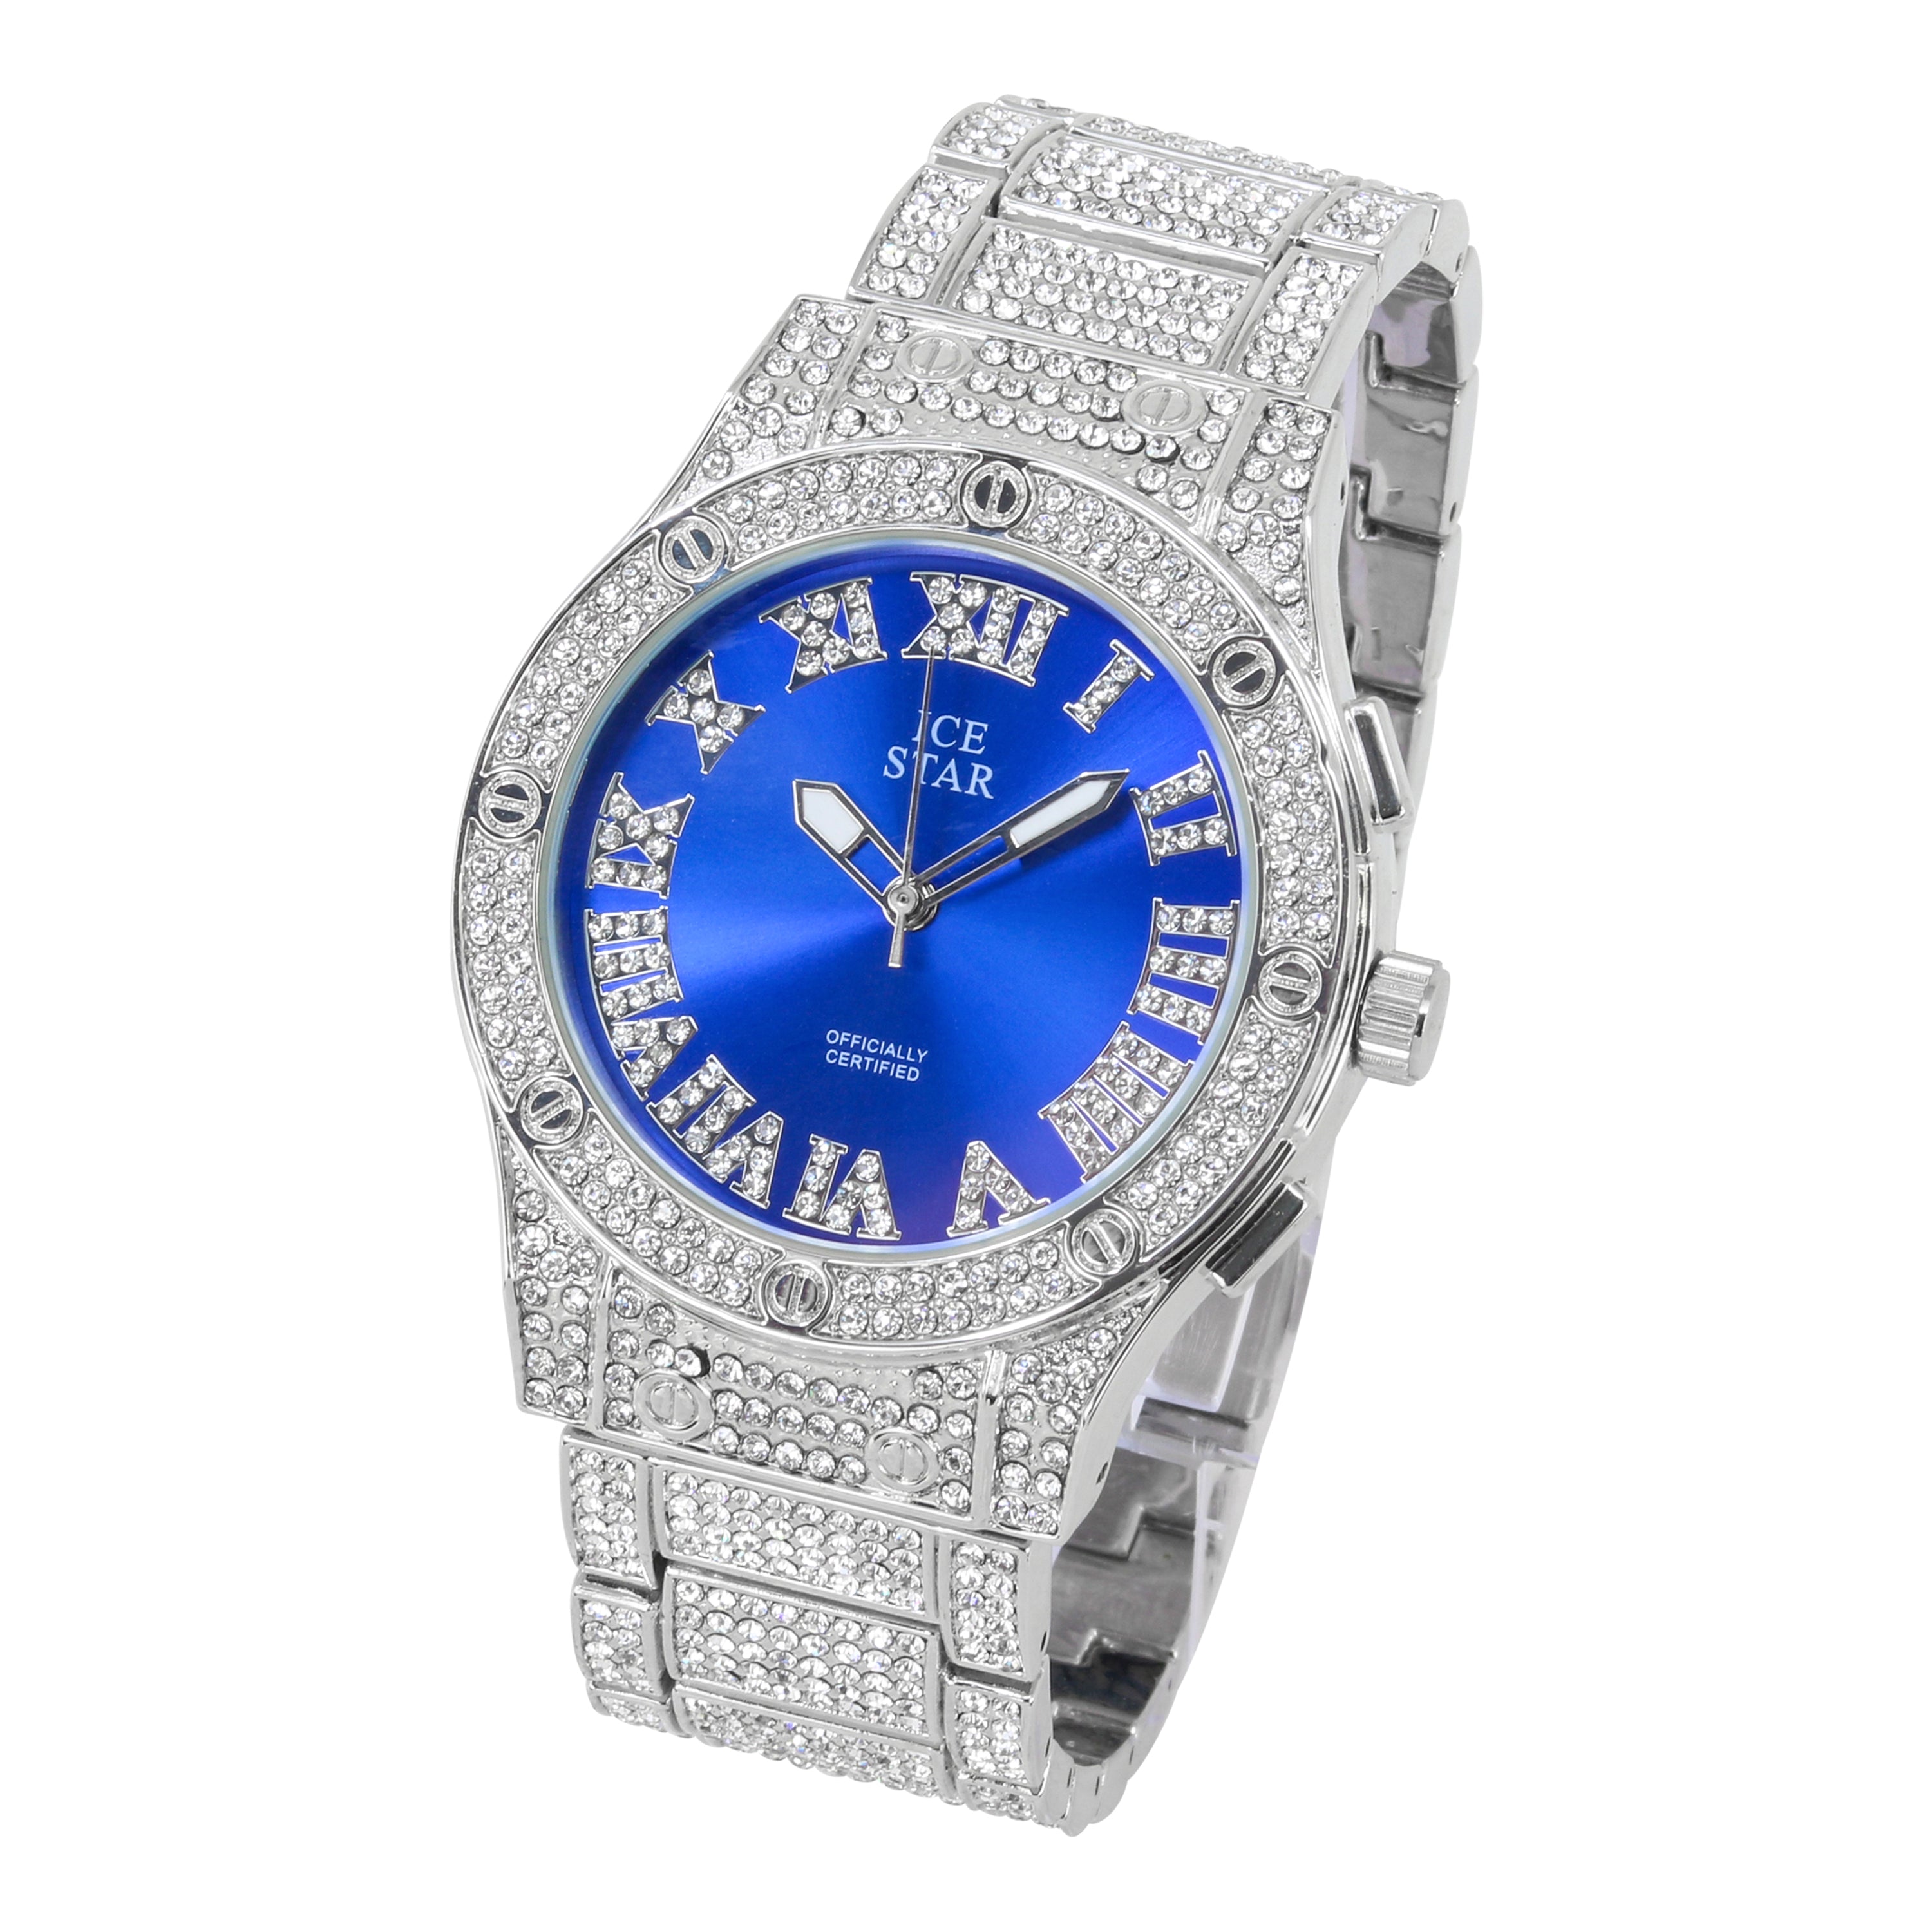 Men's Round Iced Out Watch 42mm Silver - Roman Dial